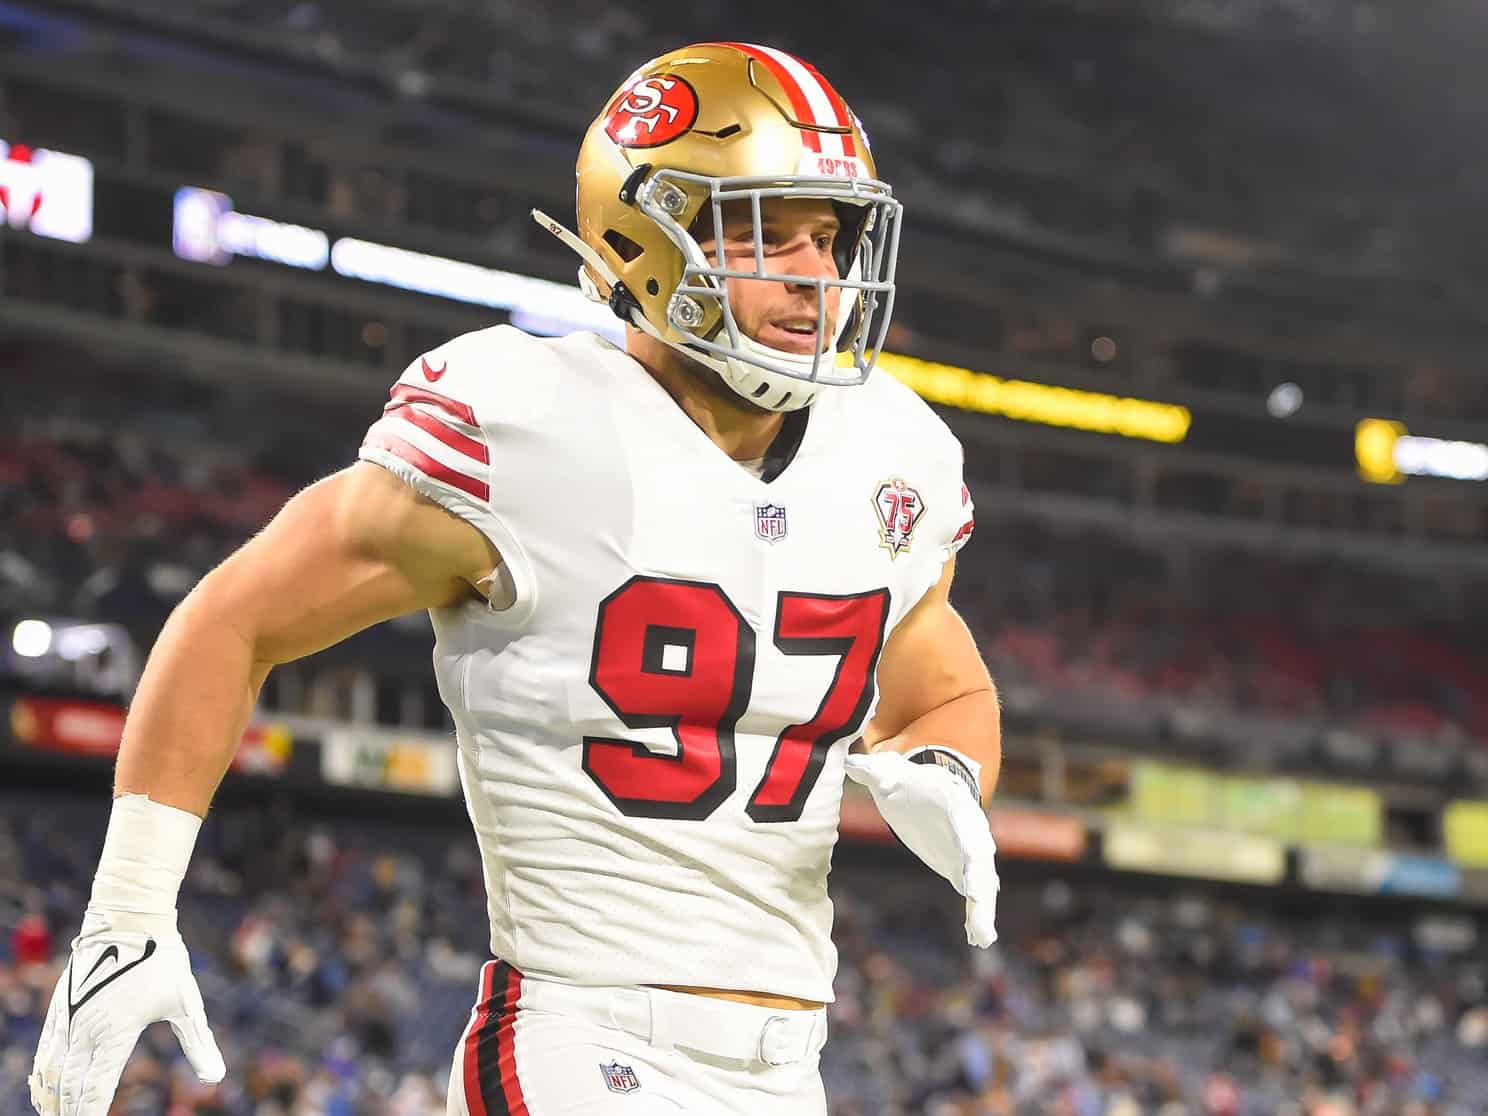 Giants' offensive line will have tough challenge against Nick Bosa